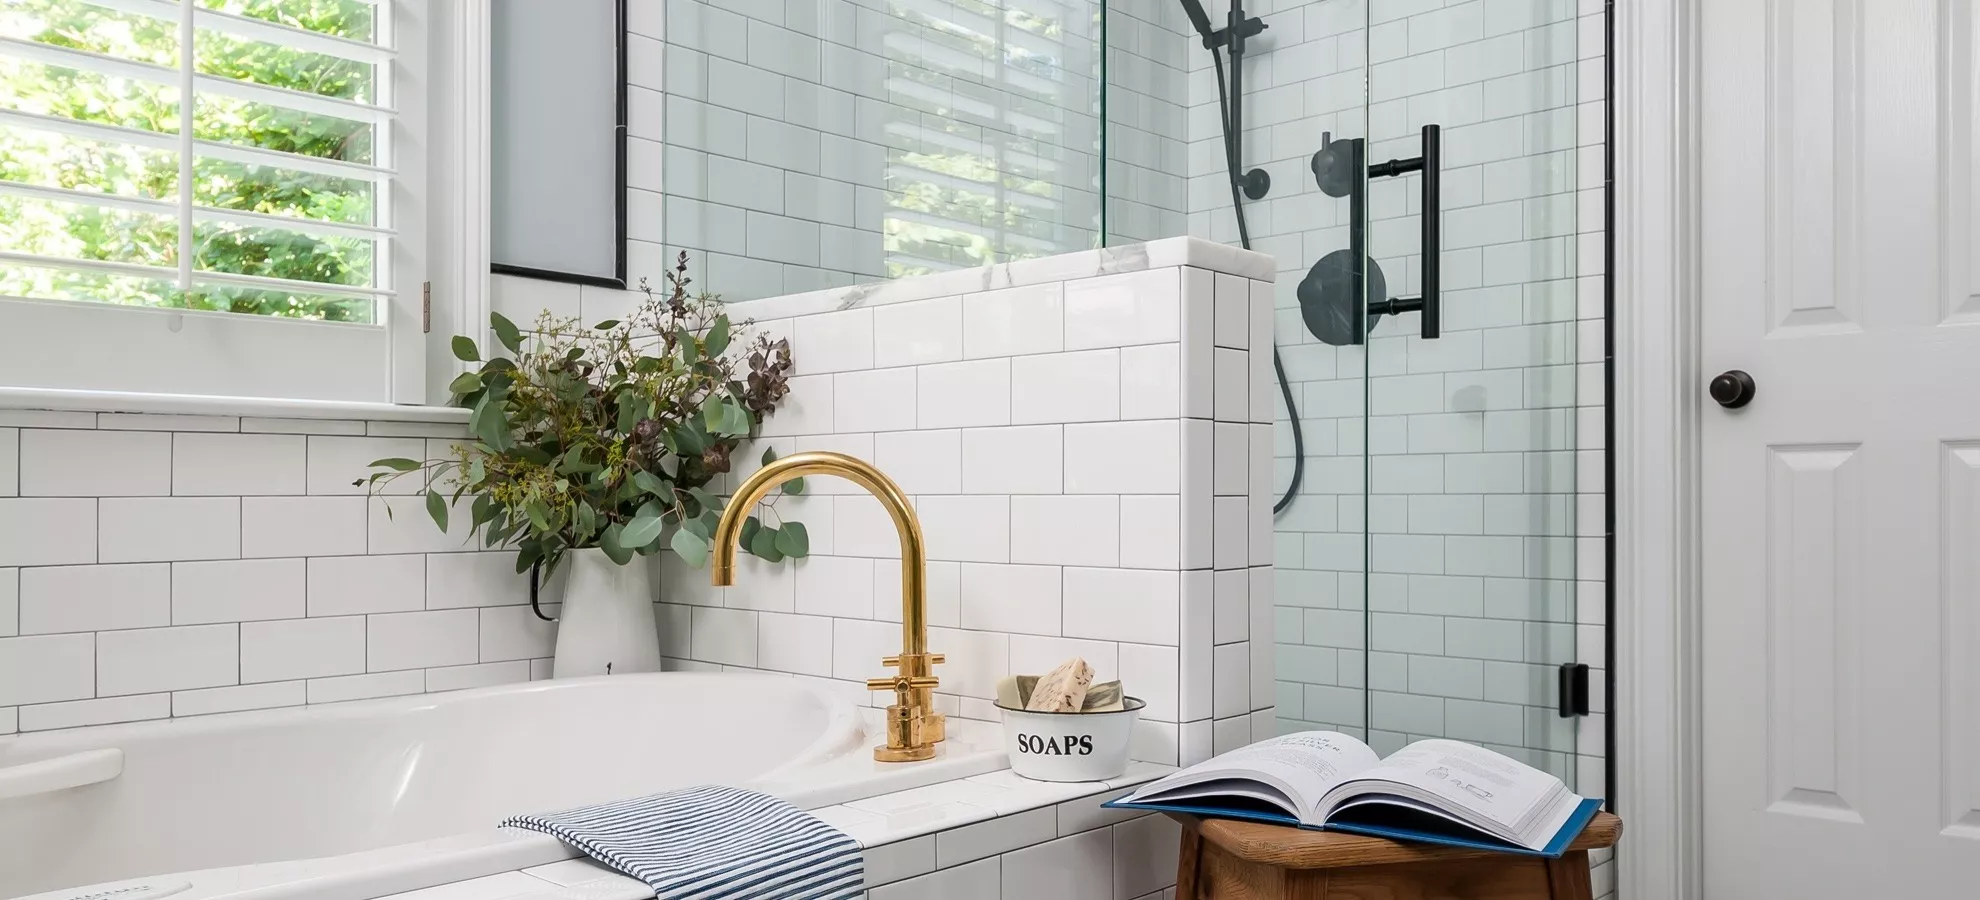 how to prepare for a remodel bathroom